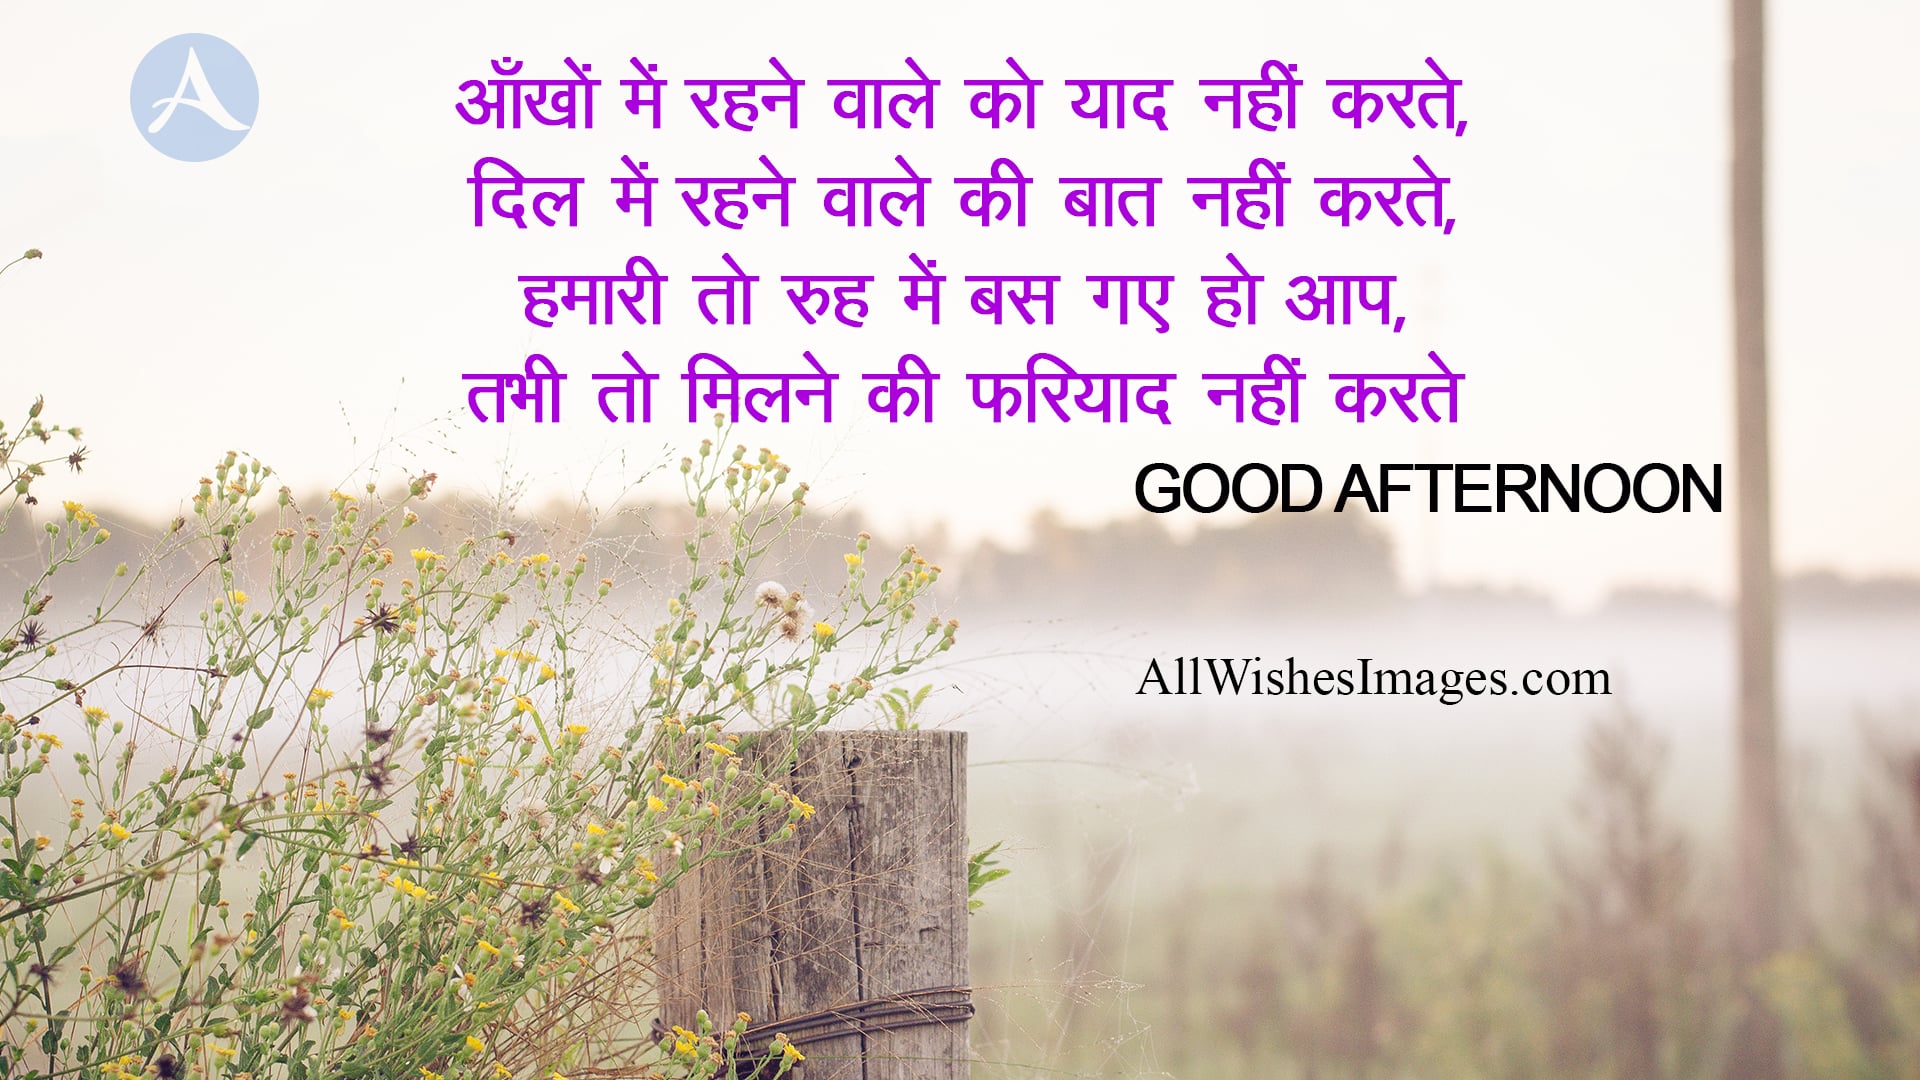 30+ Good Afternoon Image With Shayari || गुड आफ्टरनून इमेज विथ शायरी - All  Wishes Images - Images for WhatsApp